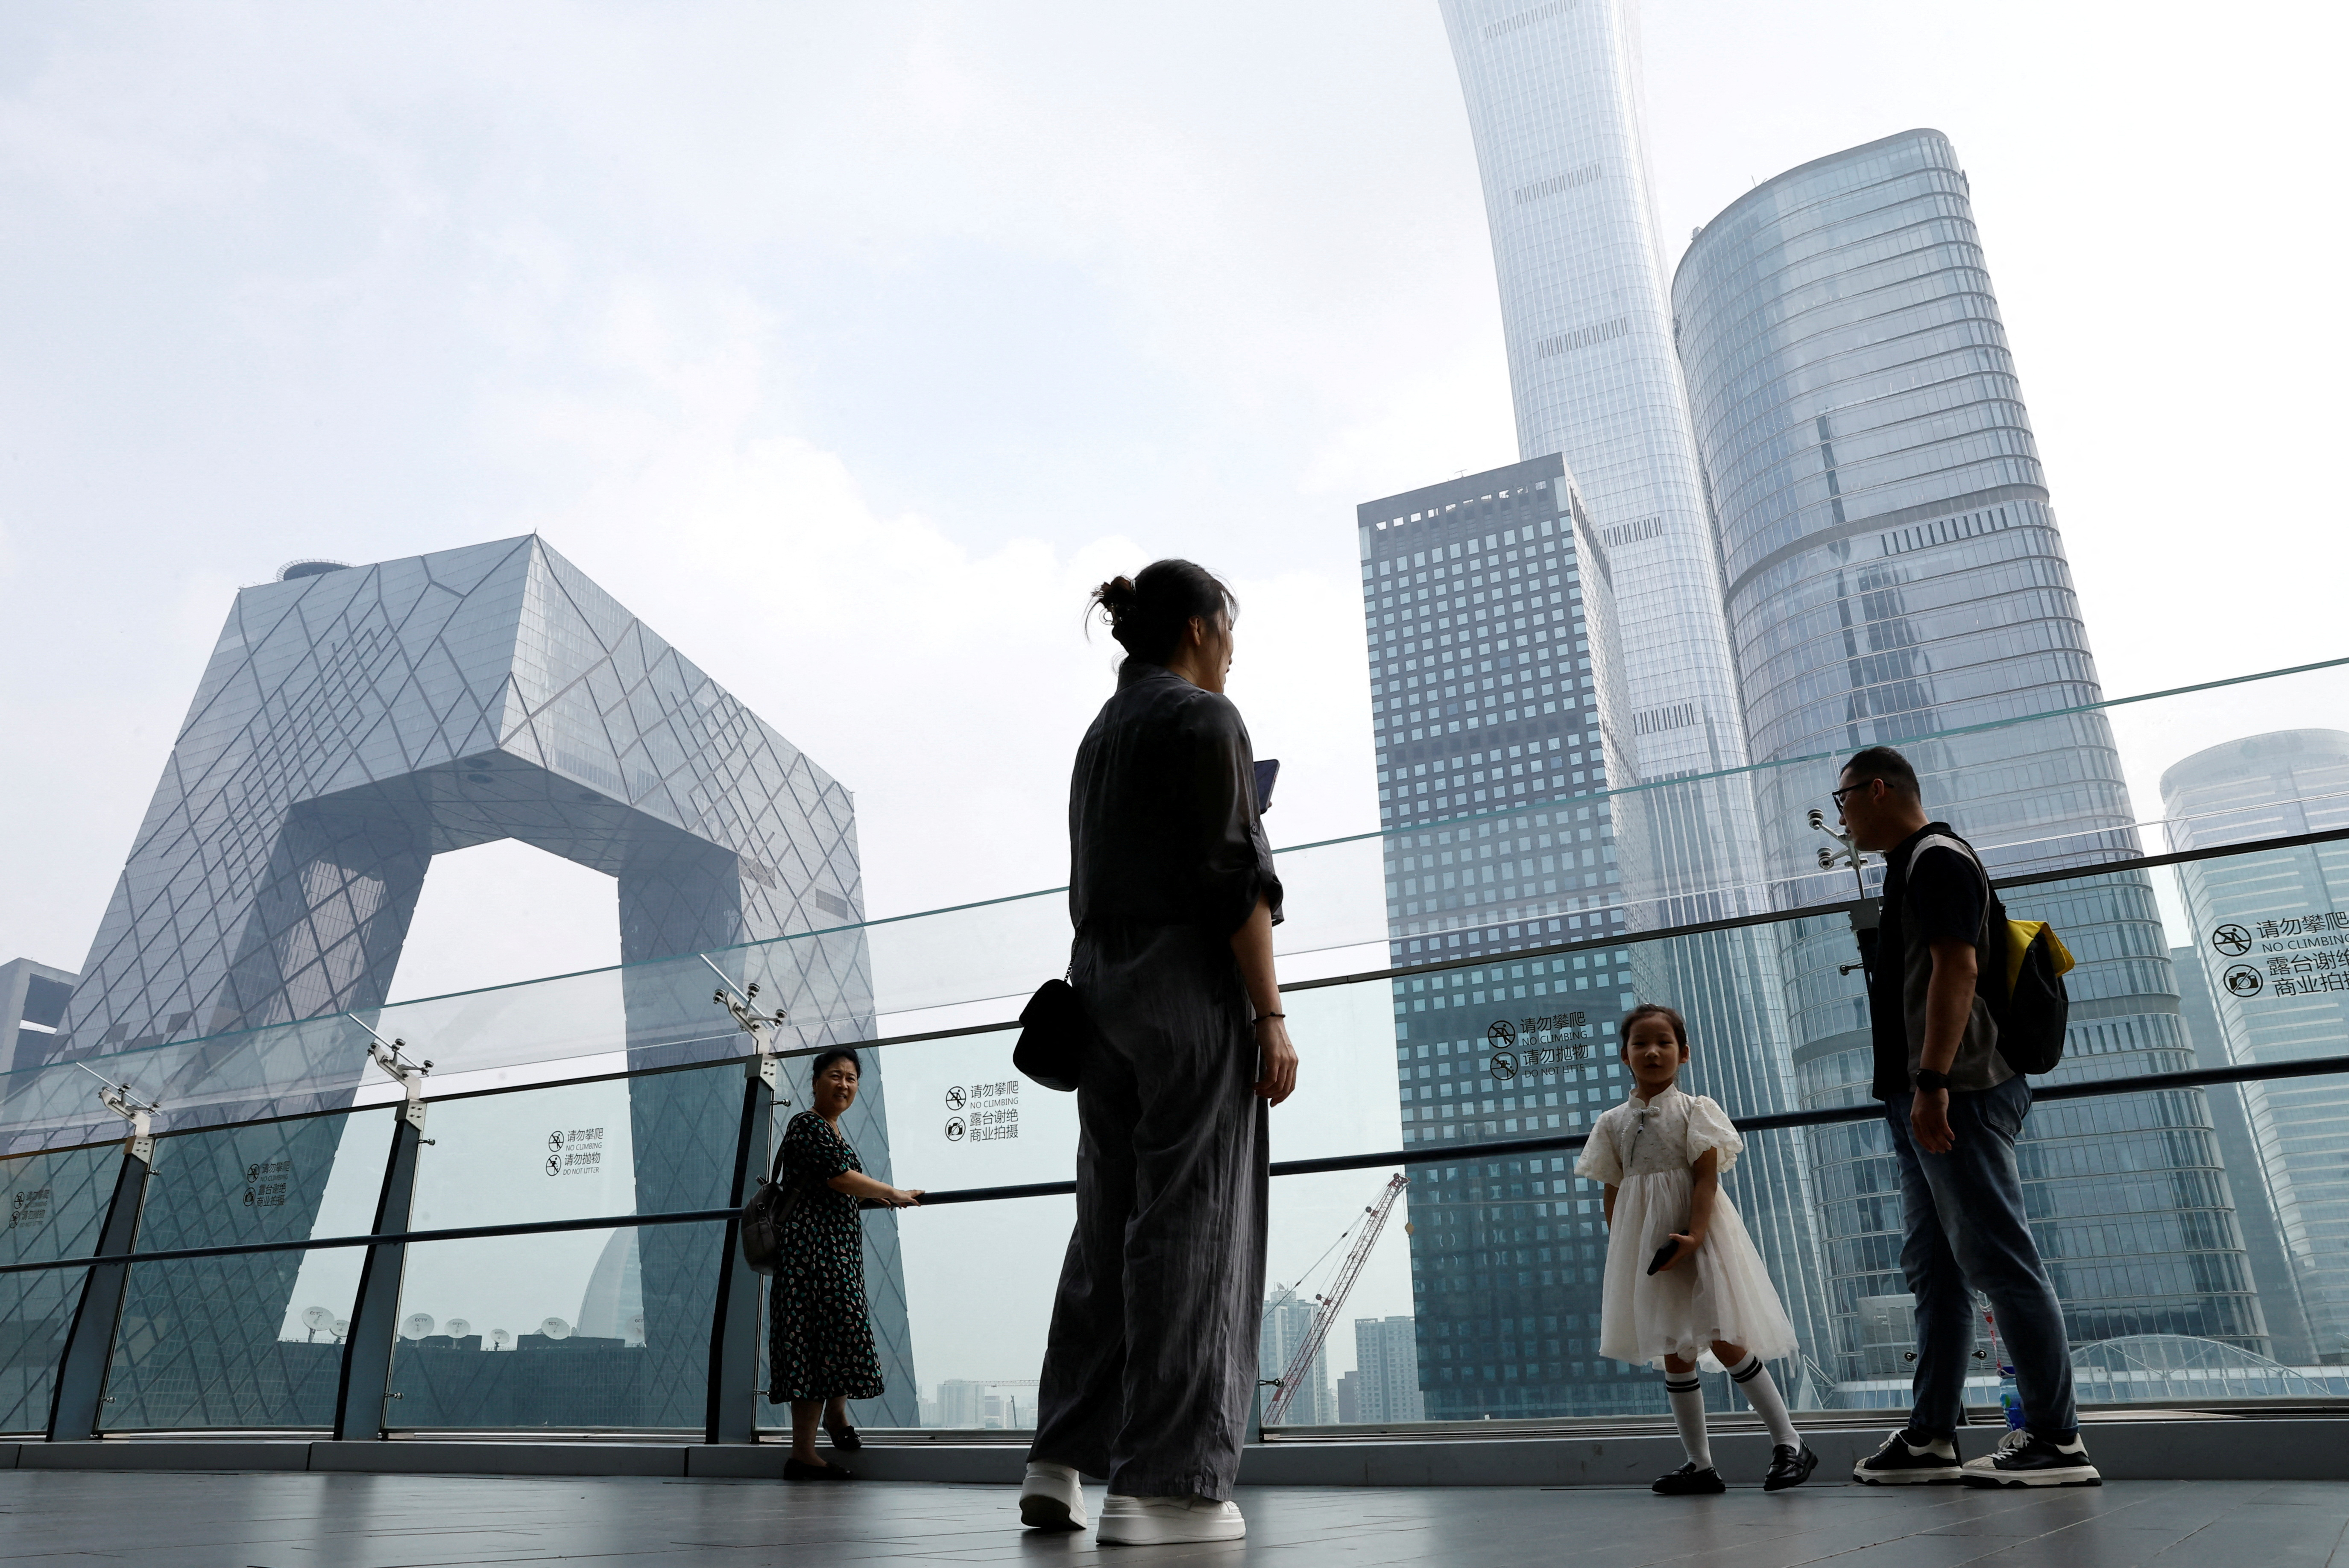 People stand at a shopping mall near the CCTV headquarters and China Zun skyscraper, in Beijing's central business district (CBD)